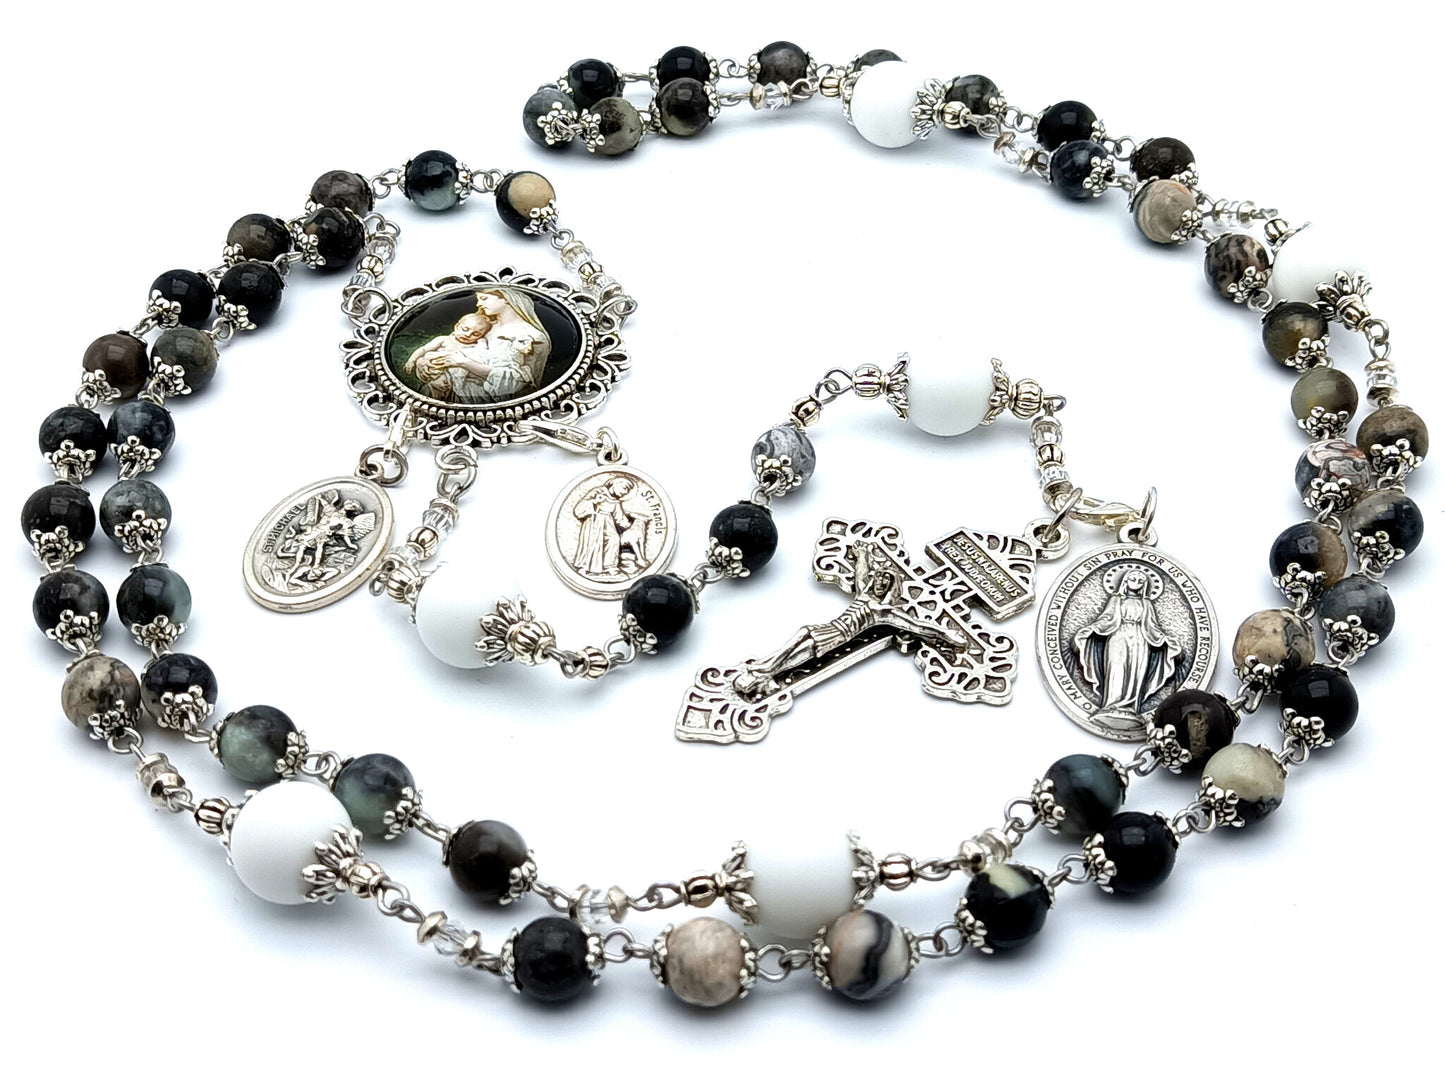 Virgin Mary and St Francis unique rosary beads with black and white gemstone beads and pardon crucifix and miraculous medal.